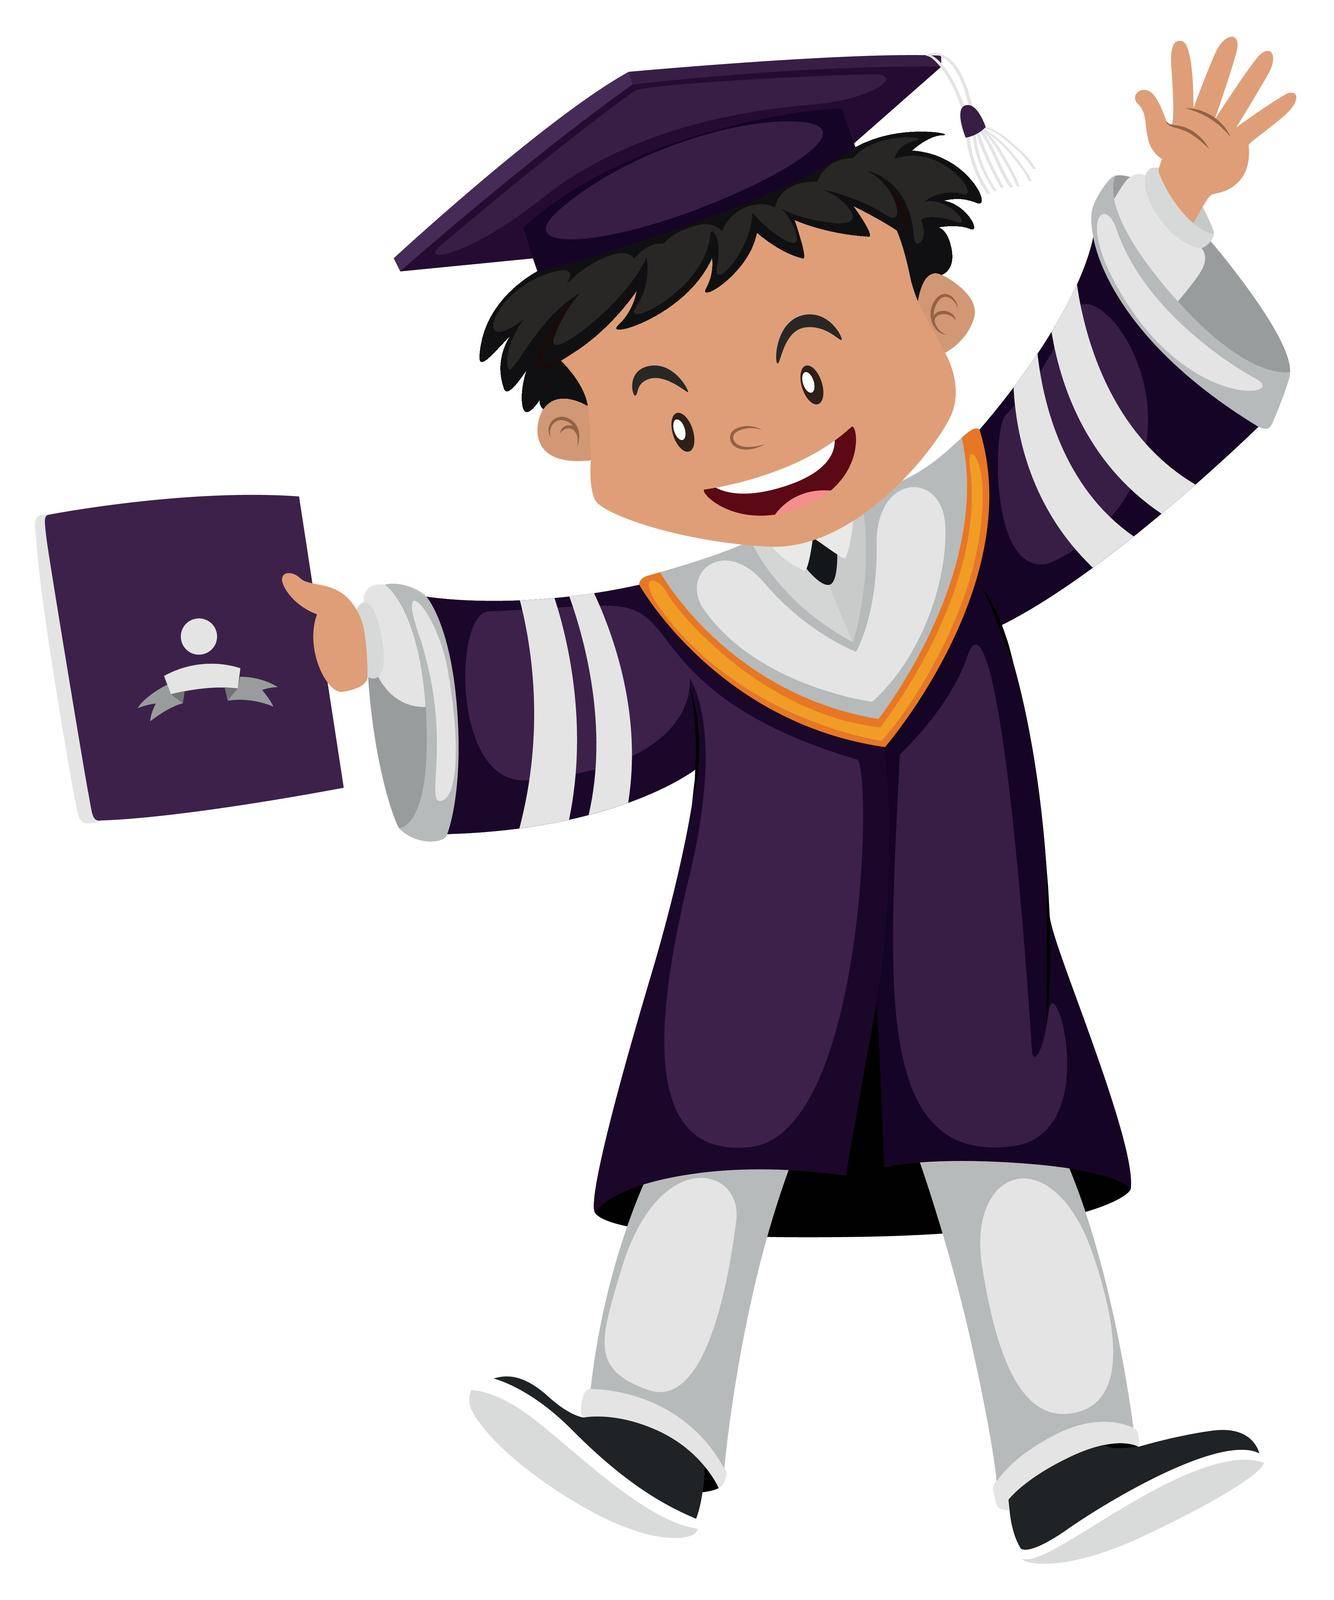 Man in purple graduation outfit by iimages